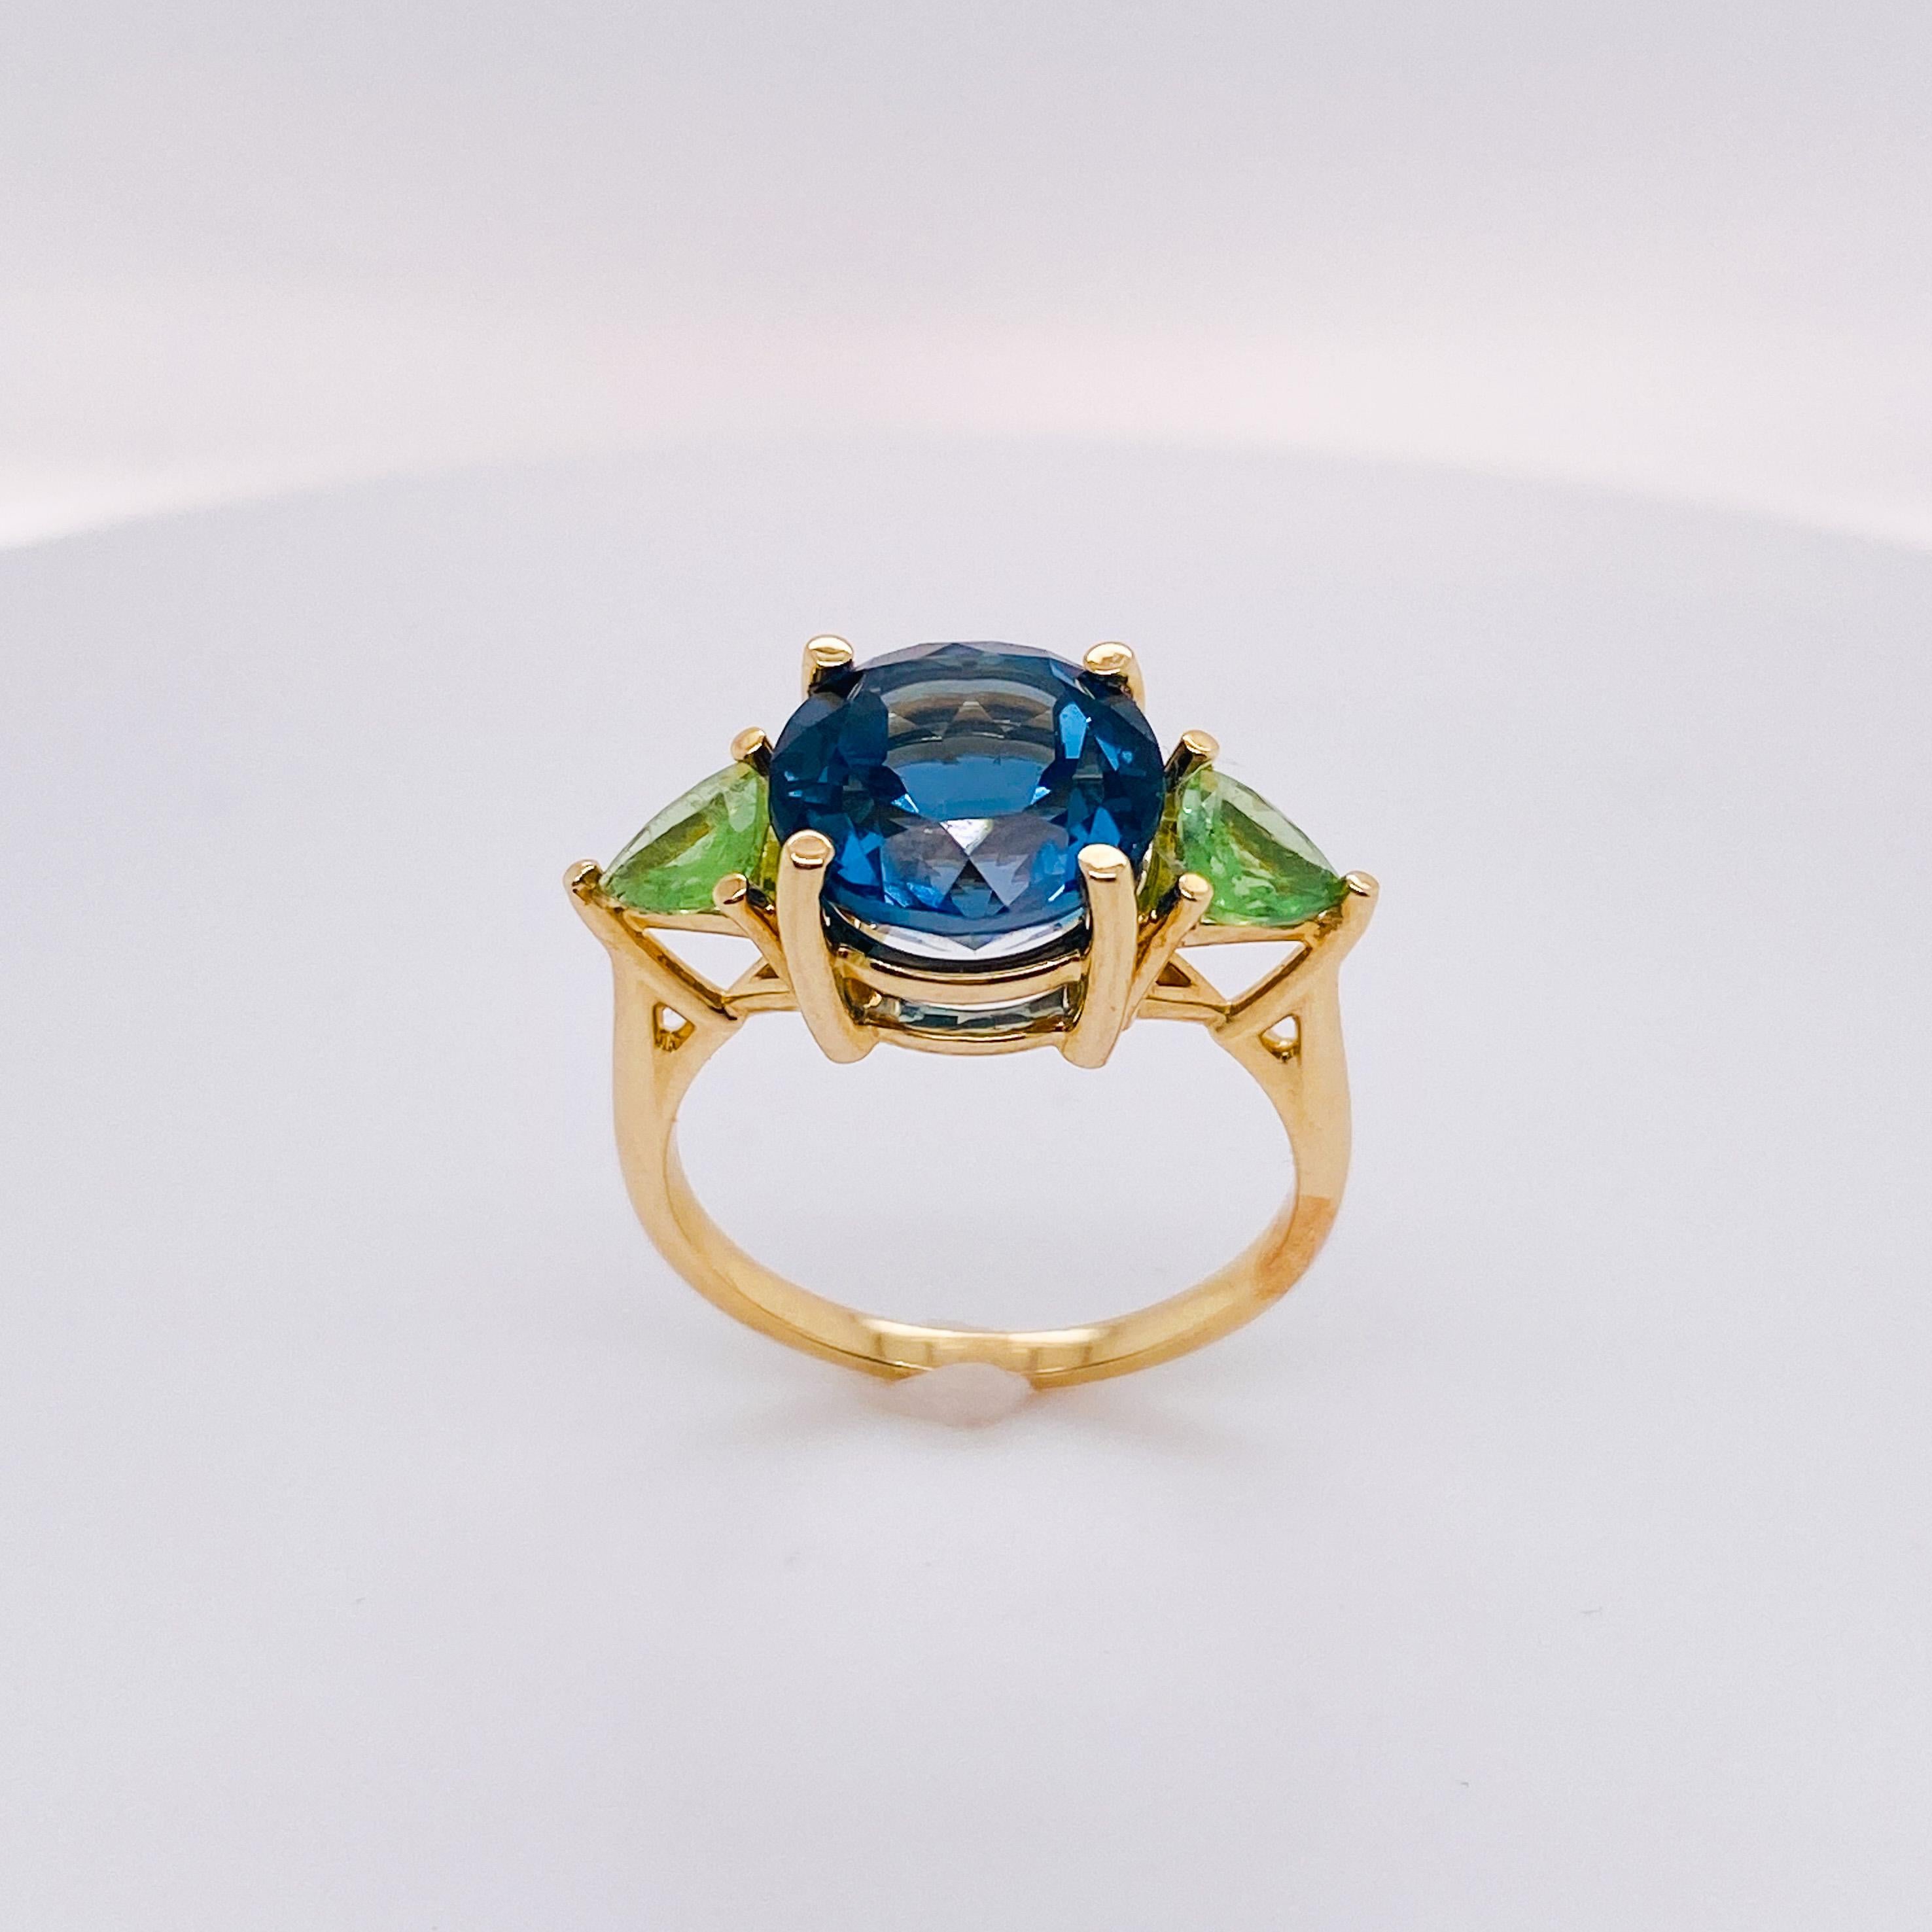 Take a walk in the ocean with these gorgeous greens and blues in this fabulous three-stone ring. Or, support your favorite NFL football team, the Seattle Seahawks!
The details for this beautiful ring are listed below:
Metal Quality: 14 karat yellow